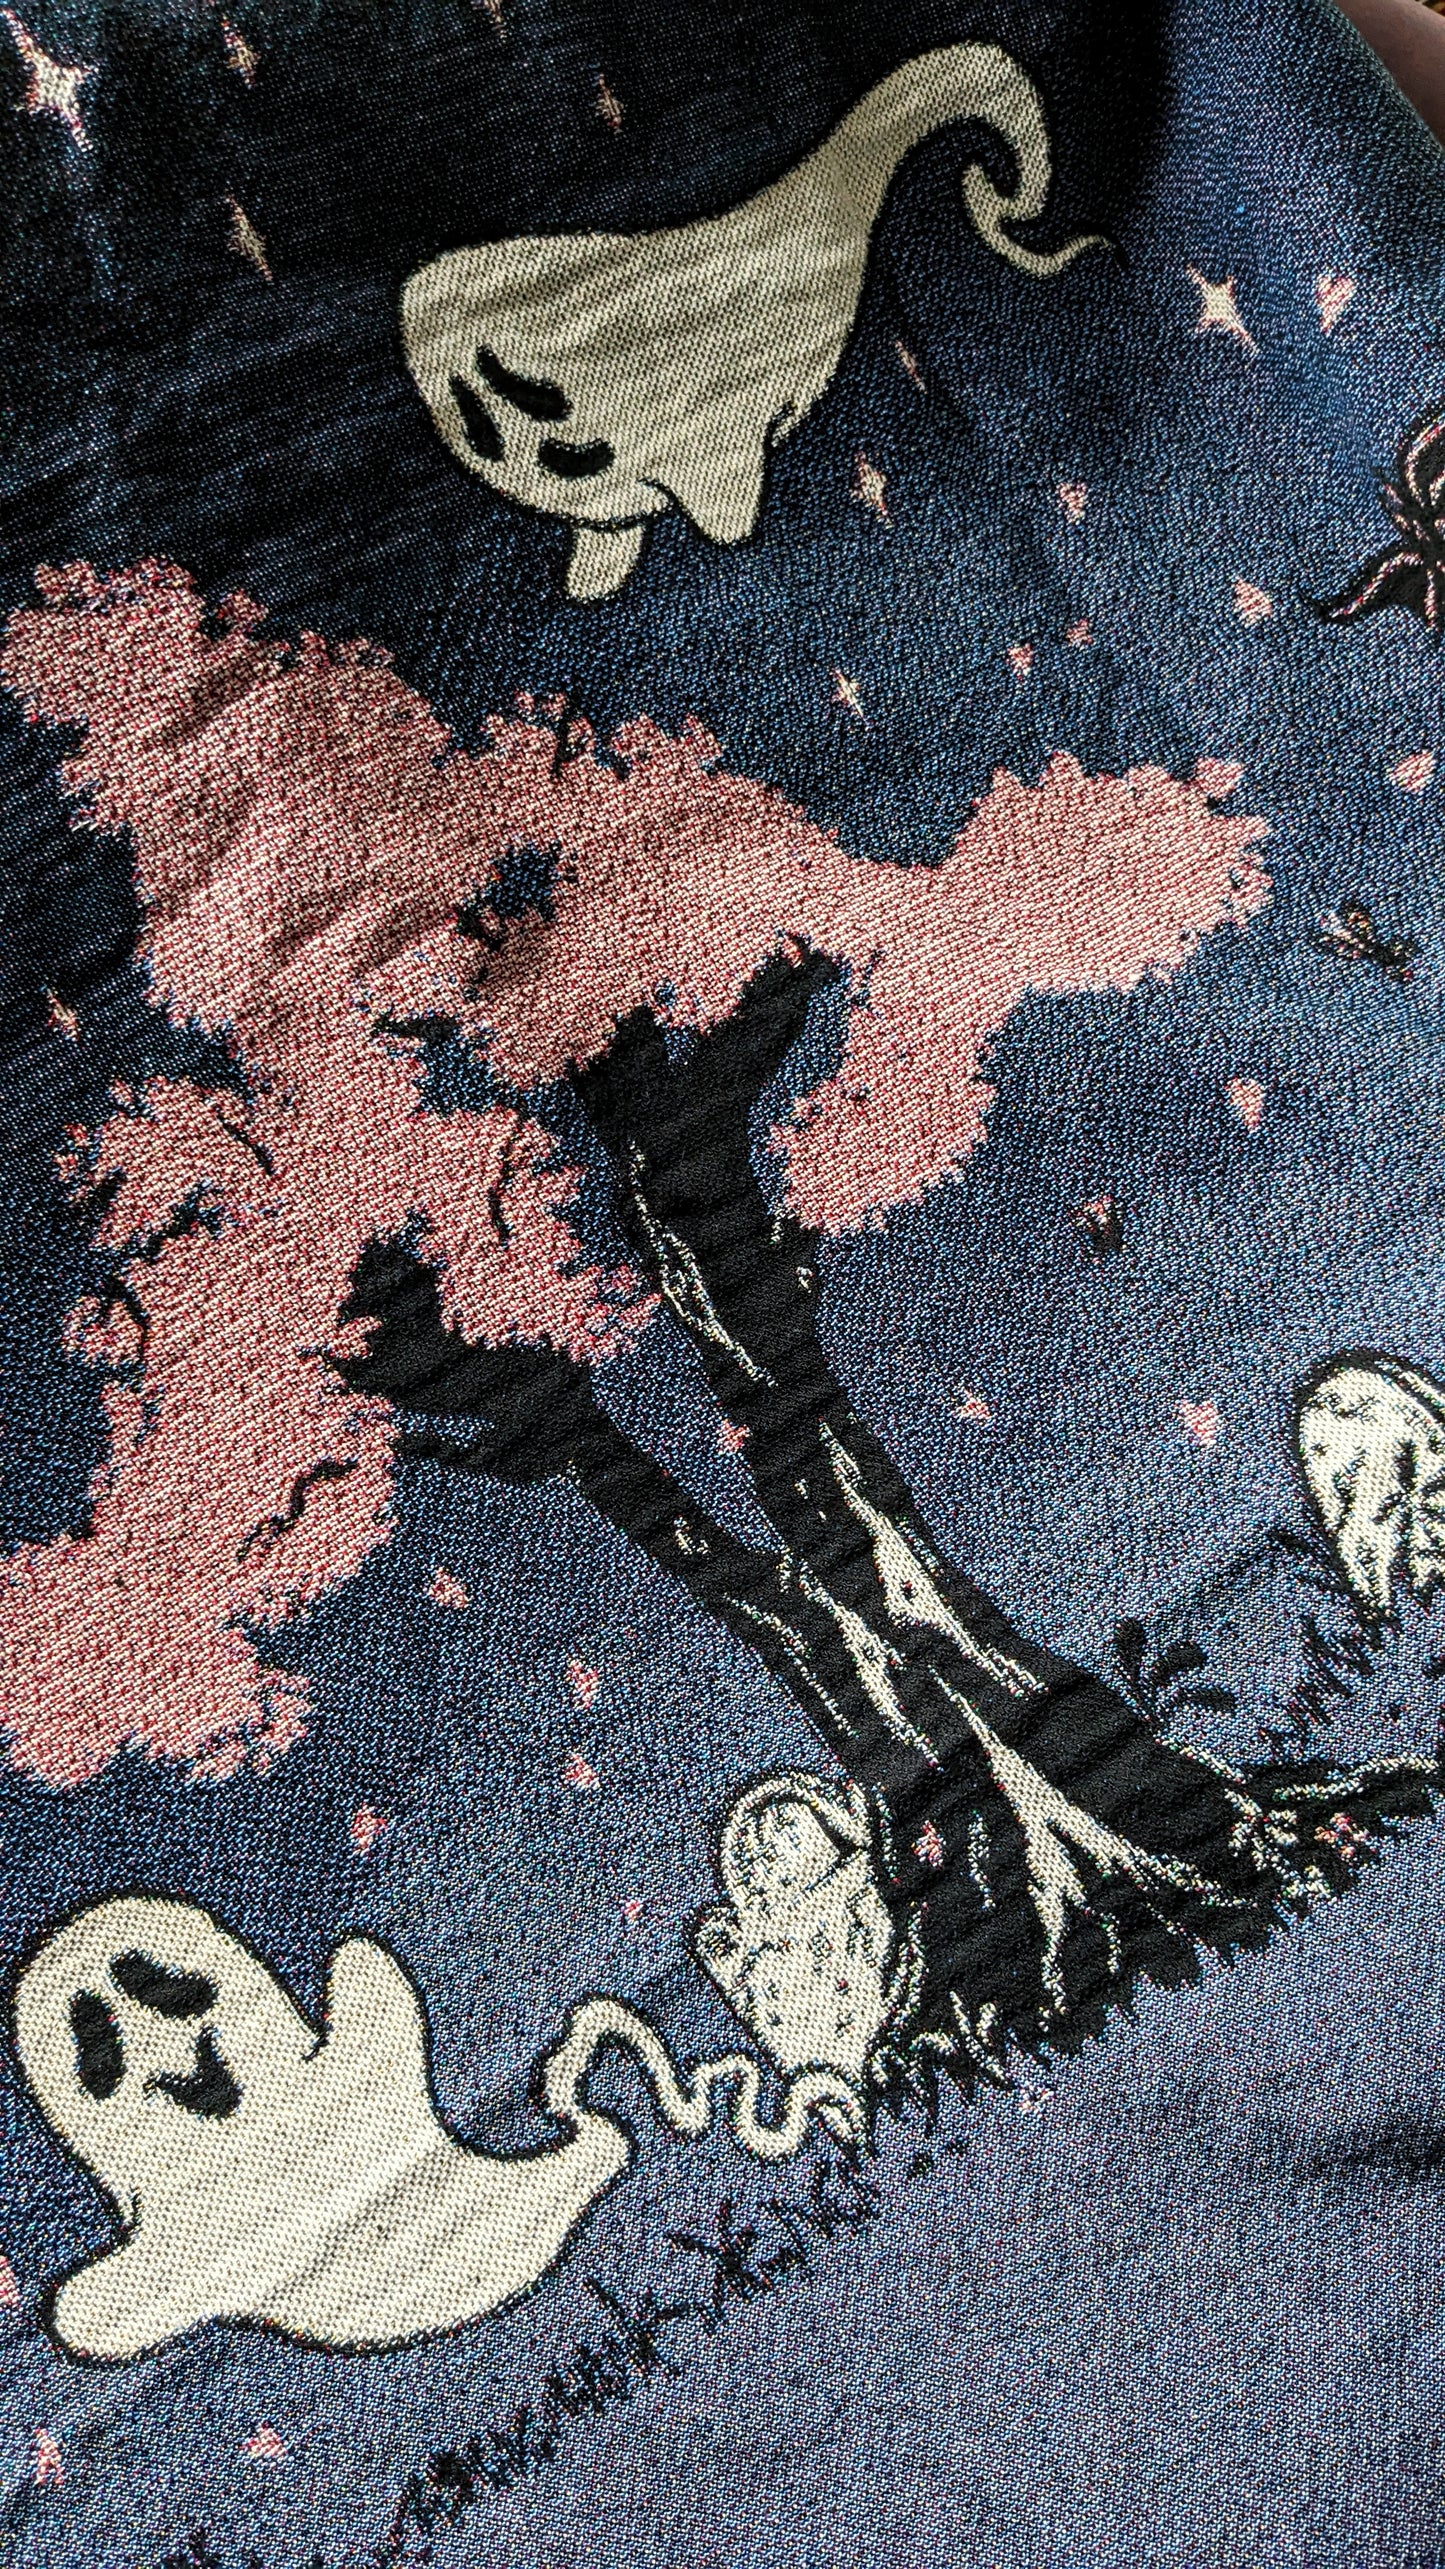 Cherry Blossoms at the Cemetery Tapestry Blanket